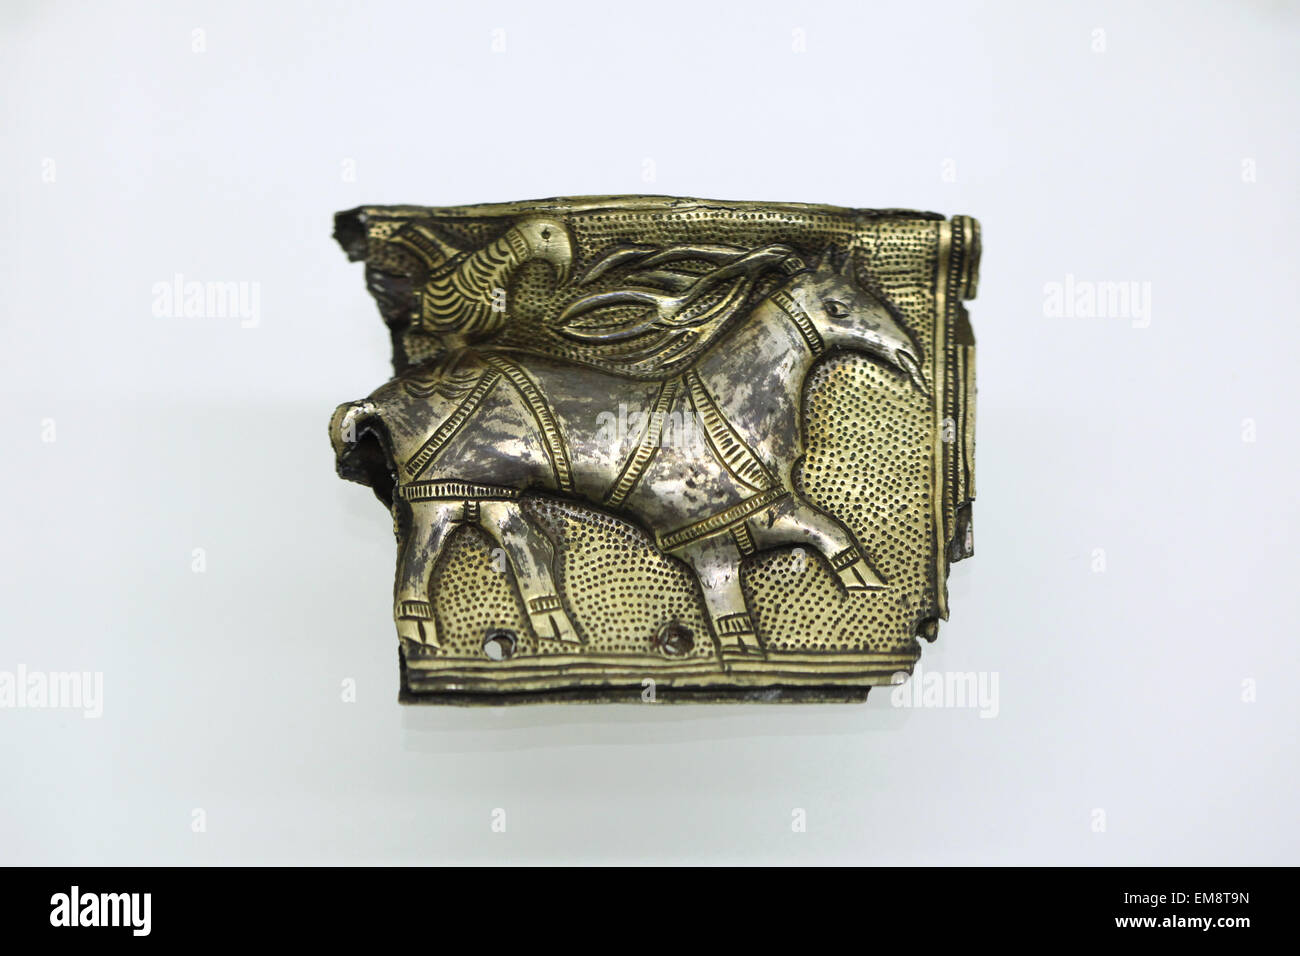 Great Moravian silver gilded kaptorga (early medieval container for amulets) with a picture of a deer and a bird from the Princess grave from Želénky displayed at the exhibition 'Great Moravia and the Beginnings of Christianity' in Prague, Czech Republic. The silver jewellery from the second half of the 9th century was discovered in the so-called Princess grave the village of Želénky, North Bohemia, Czech Republic. The exhibition presenting medieval treasures and original artefacts of the first Slavic state runs in Prague Castle till June 28, 2015. Stock Photo